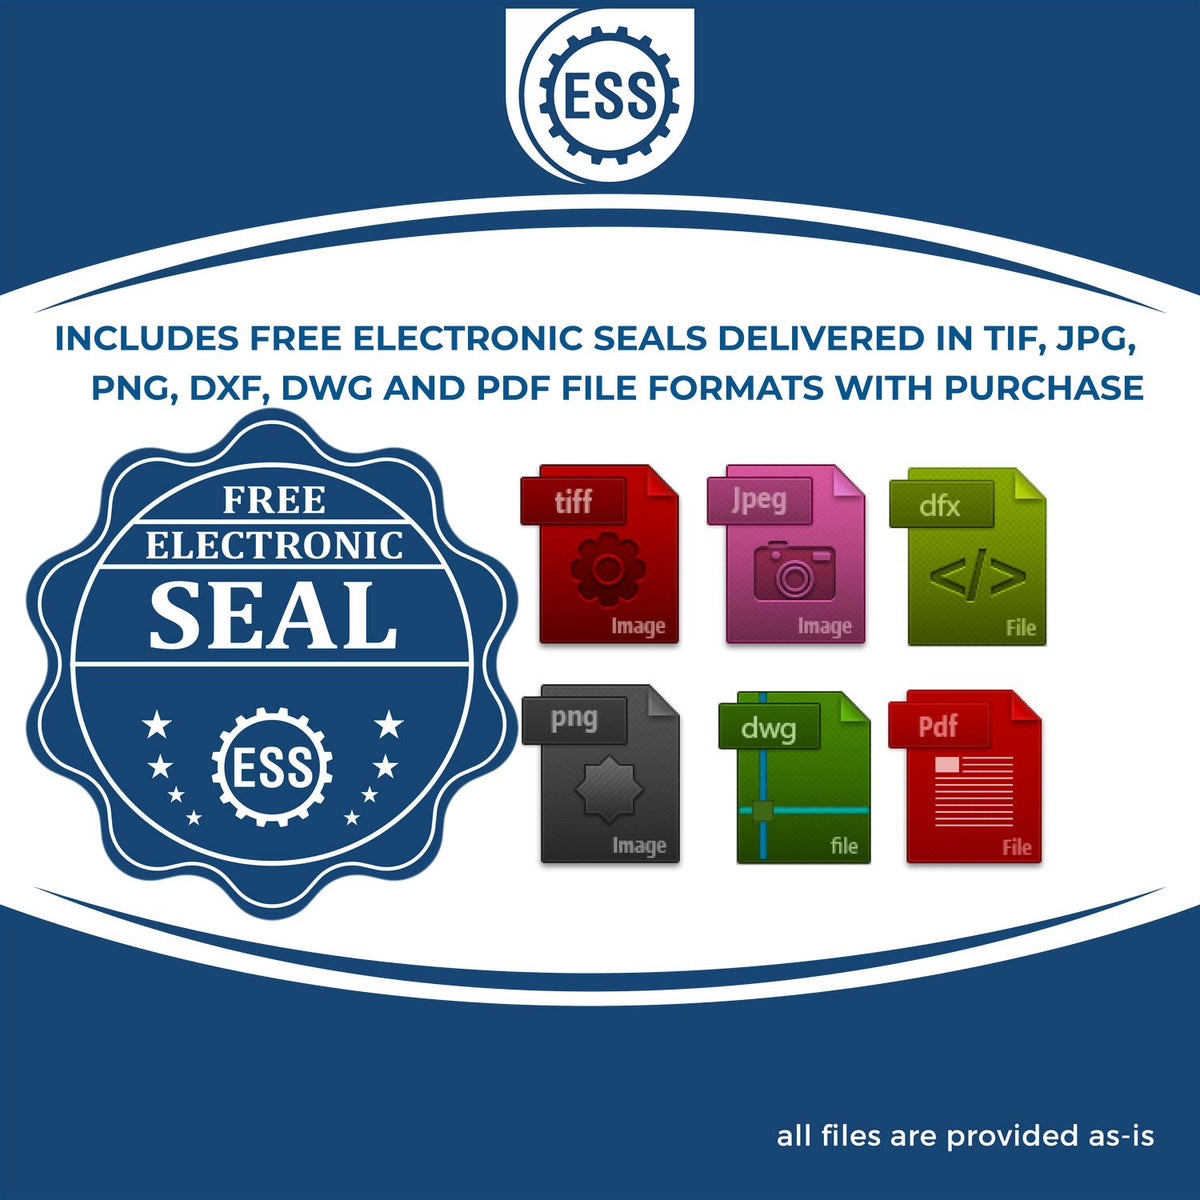 An infographic for the free electronic seal for the Hybrid New York Architect Seal illustrating the different file type icons such as DXF, DWG, TIF, JPG and PNG.